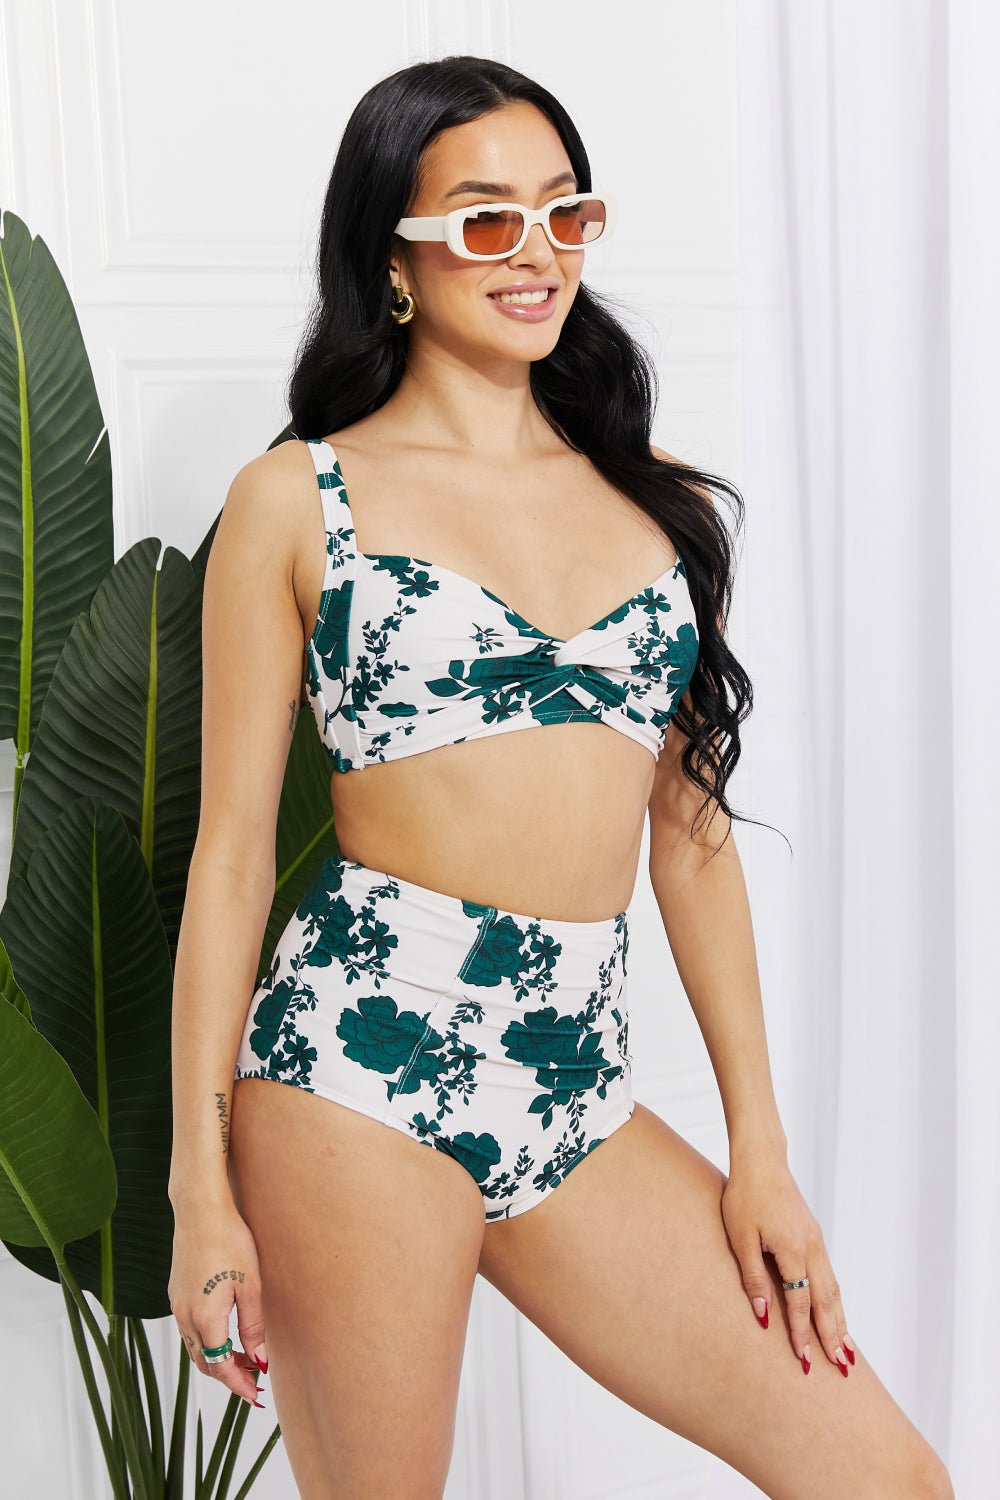 Marina West Swim Take A Dip Twist High - Rise Bikini in Forest - Happily Ever Atchison Shop Co.